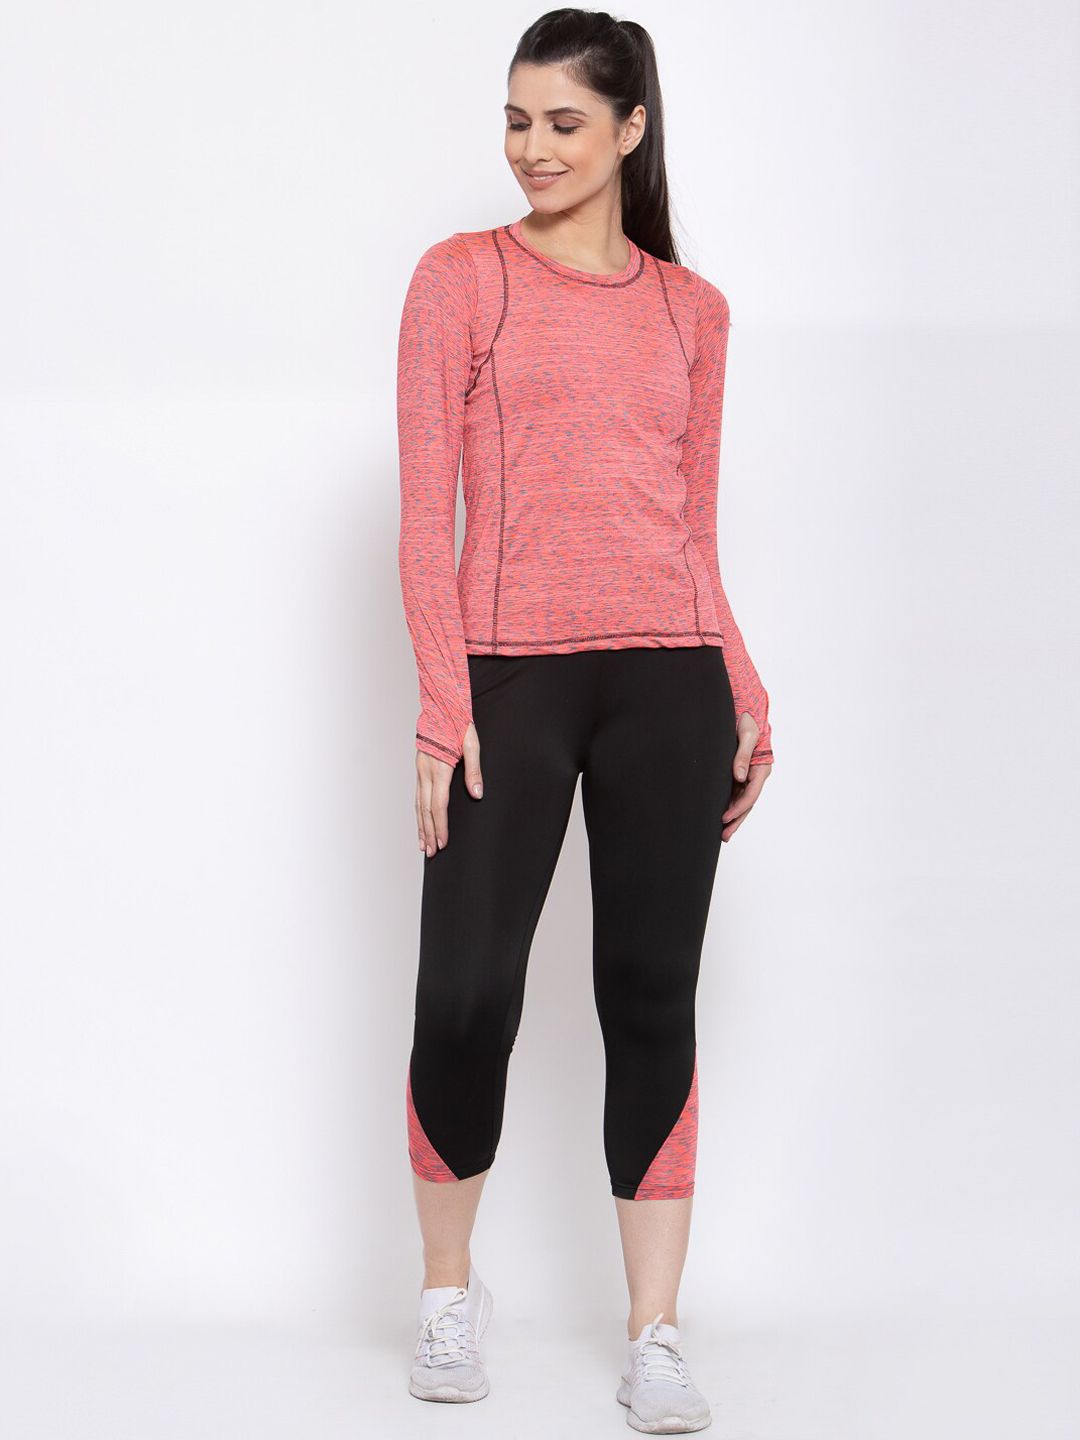 CUKOO Women Pink Self Design Track Top With Black & Pink Colourblocked Track Pants Price in India